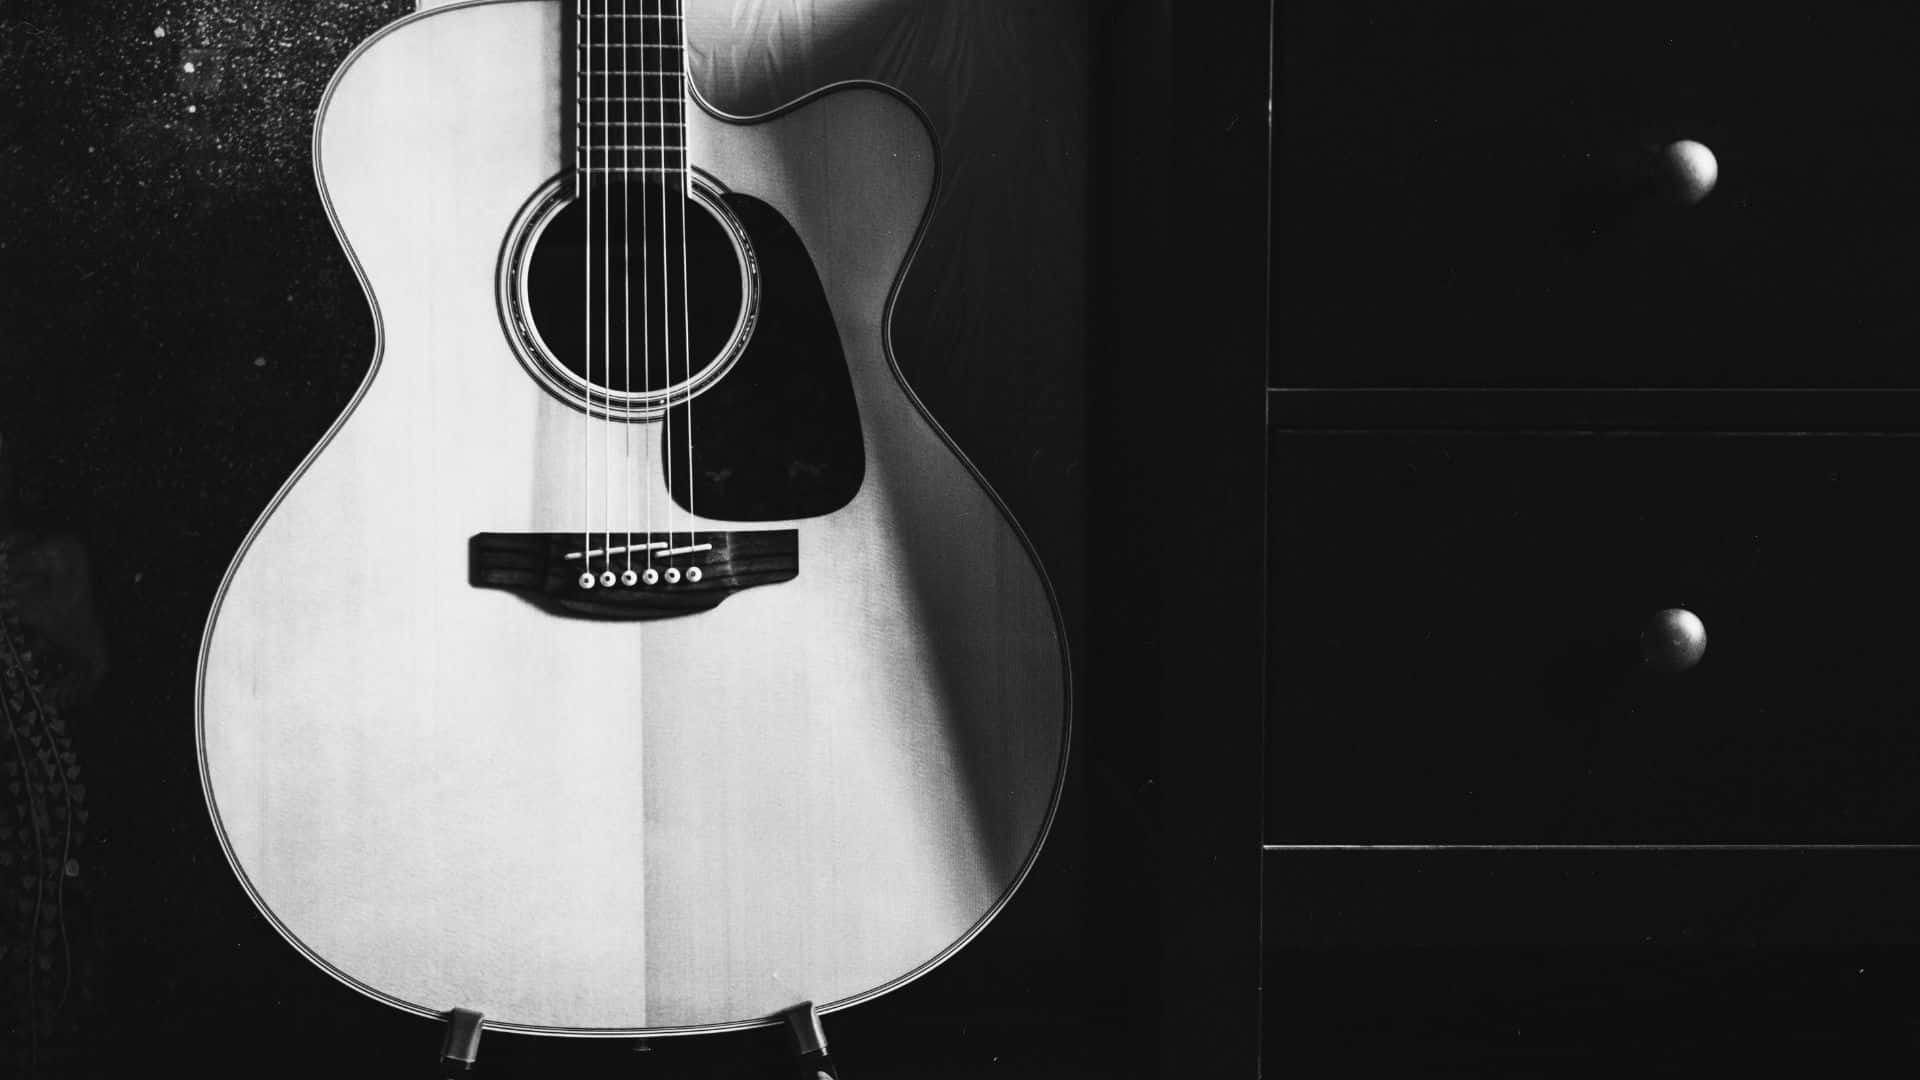 Captivating Black and White Guitar Wallpaper